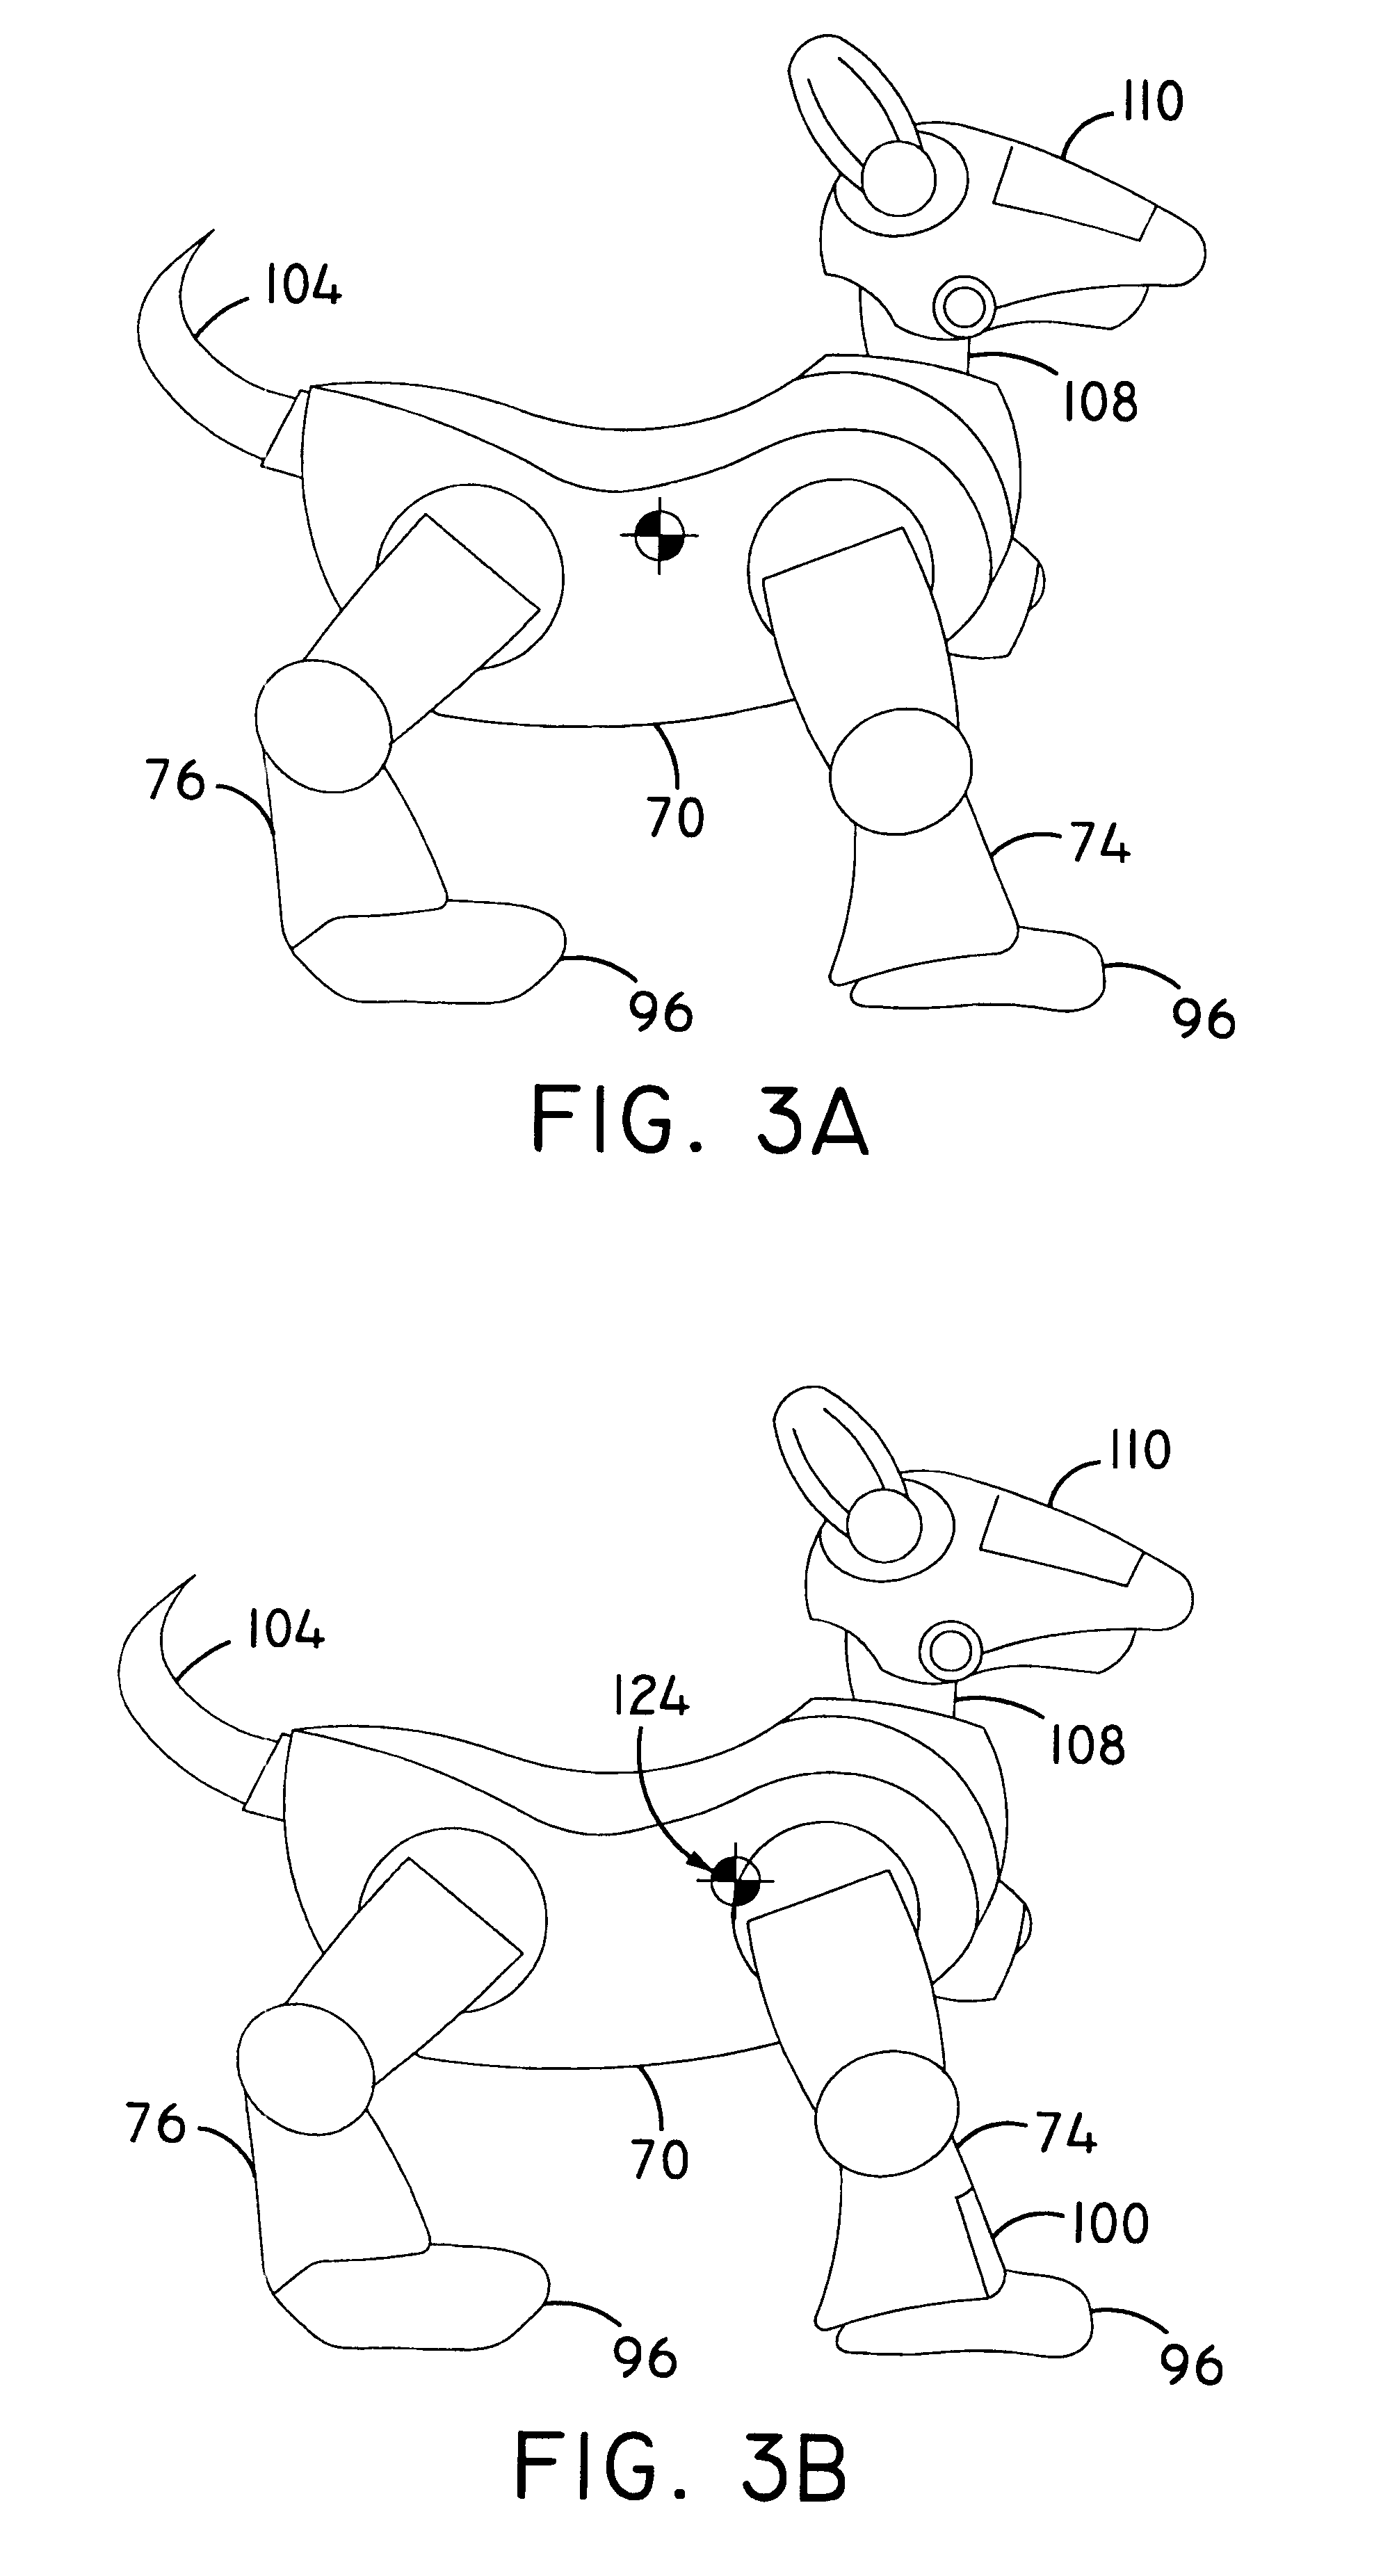 Self-stabilizing walking apparatus that is capable of being reprogrammed or puppeteered